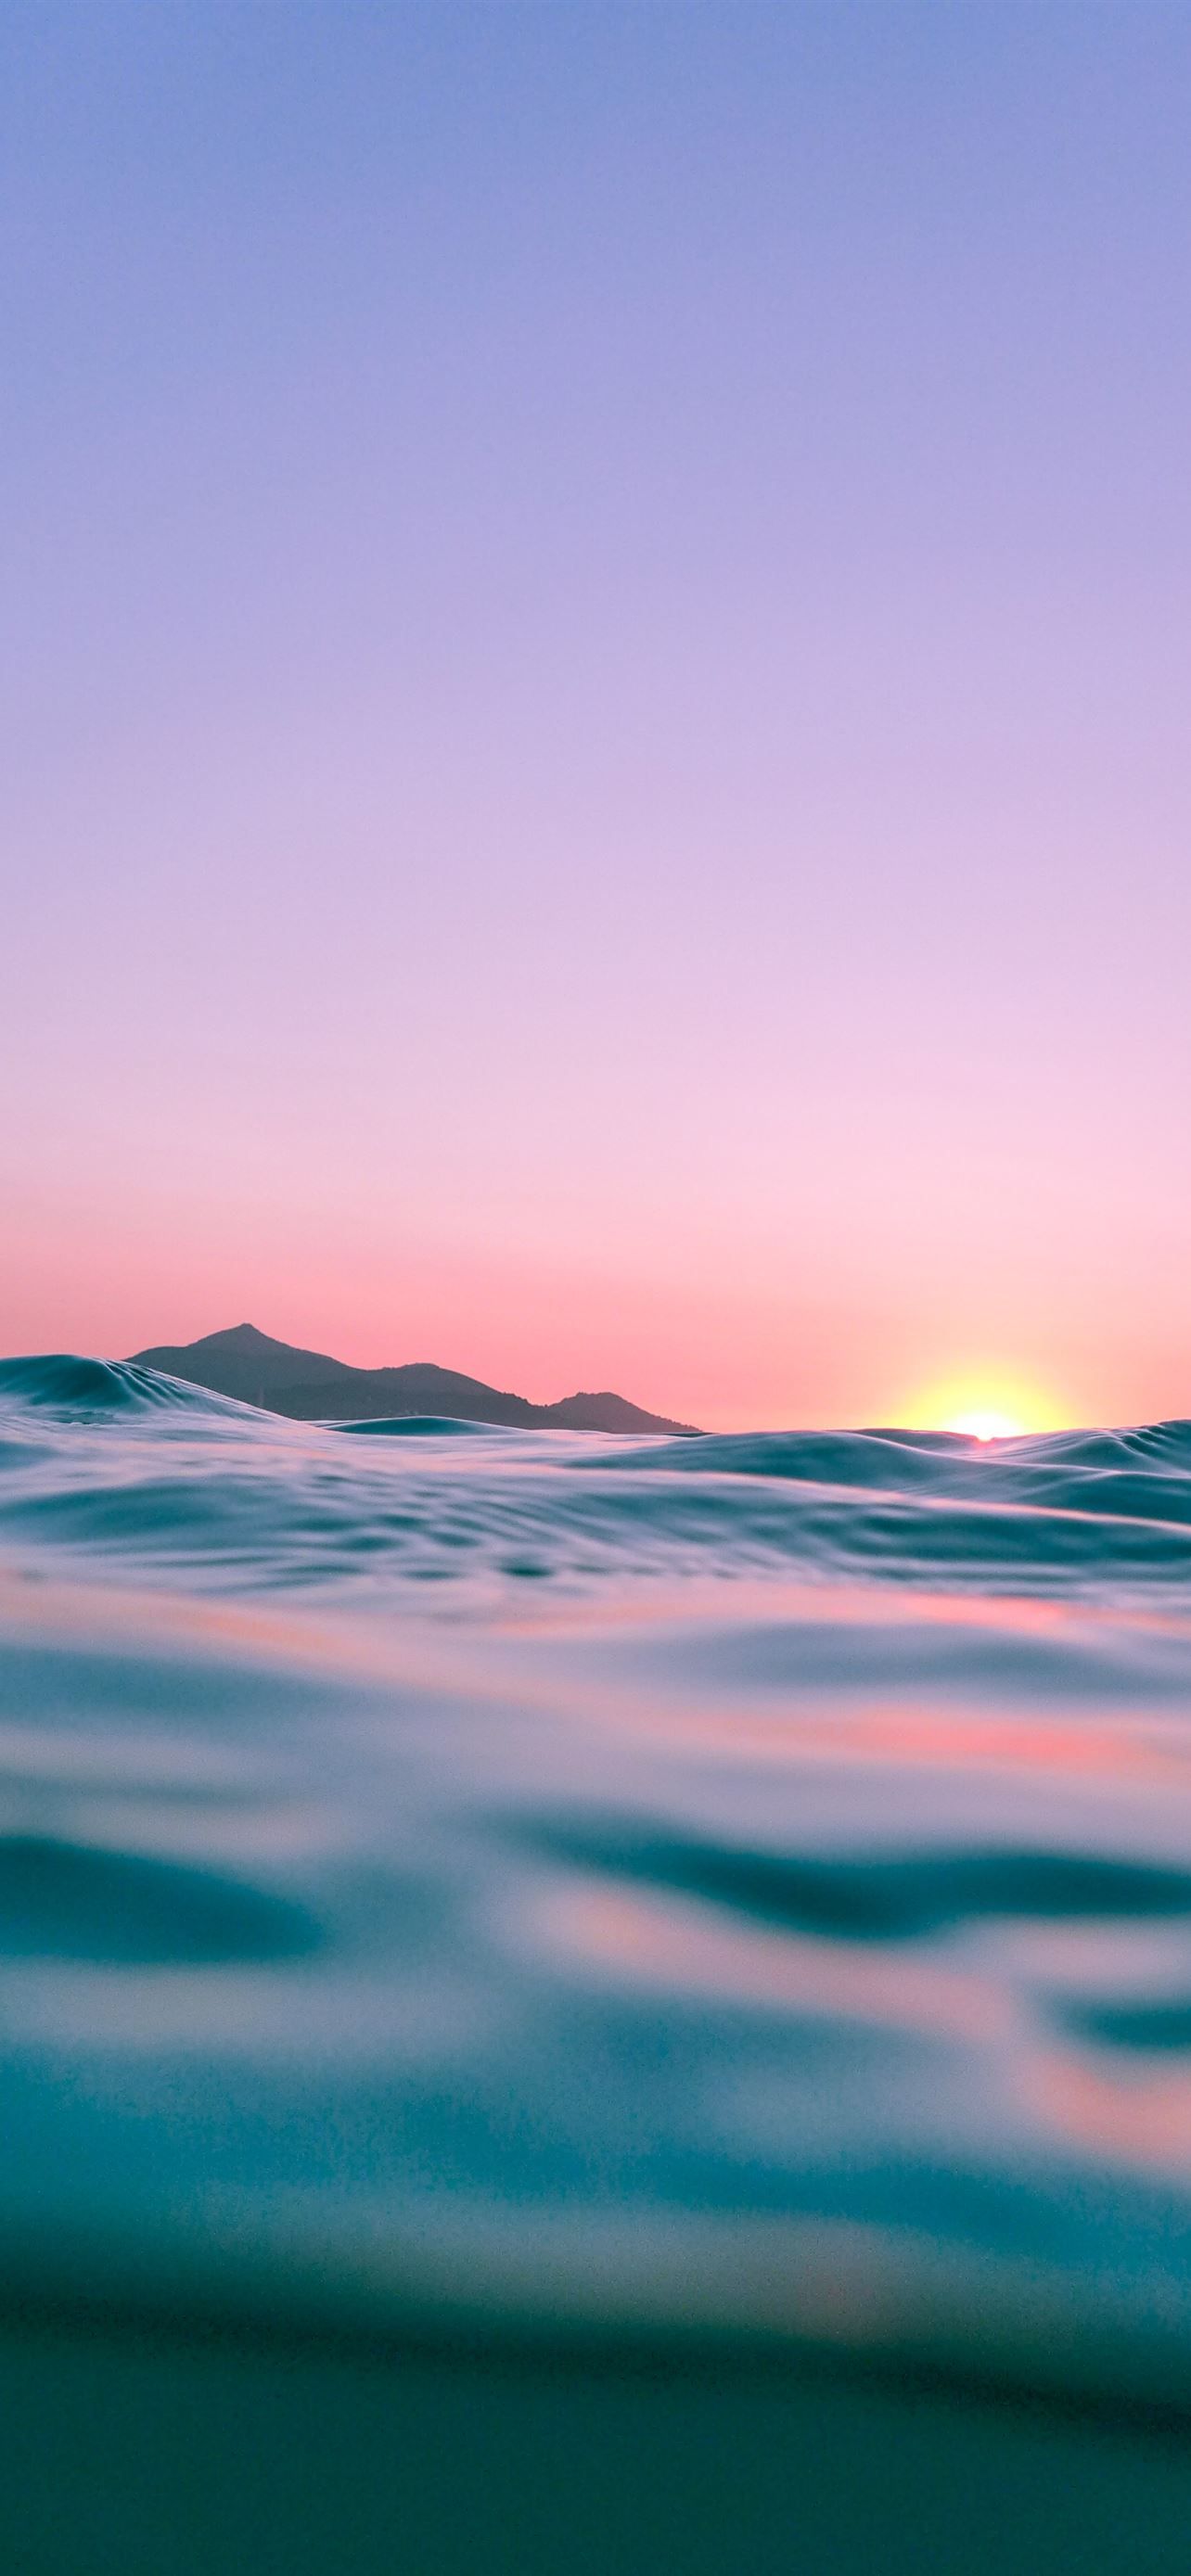 A sunset over the ocean with waves - Ocean, water